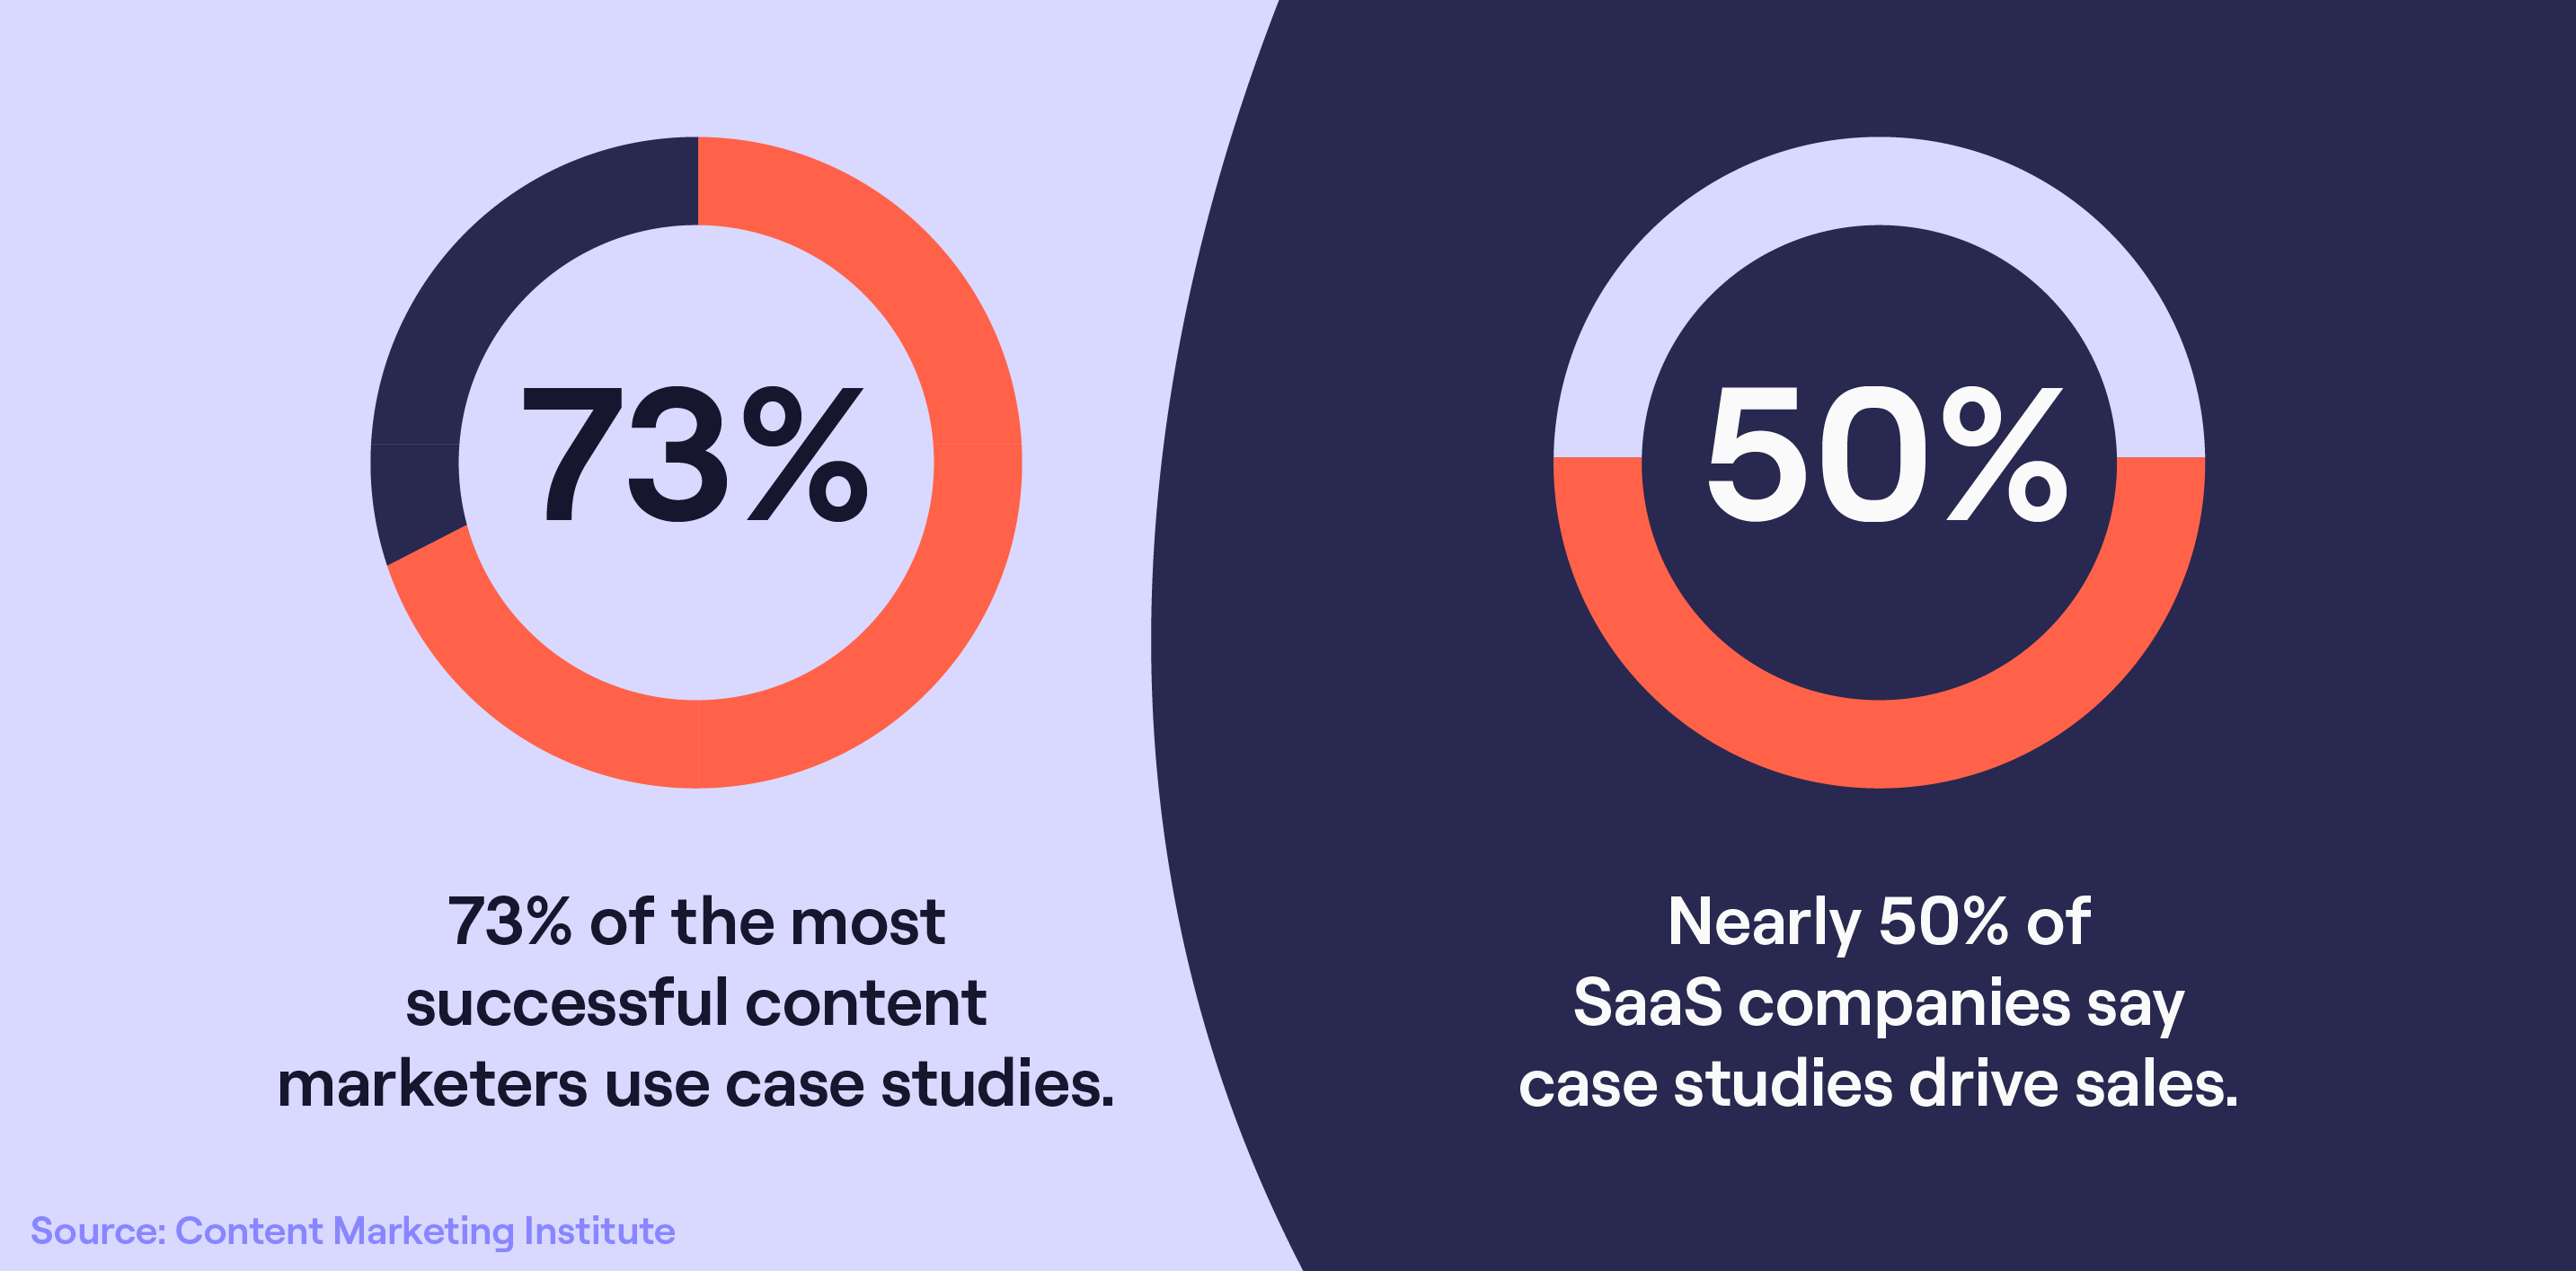 Case studies are an important part of content marketing to drive sales.